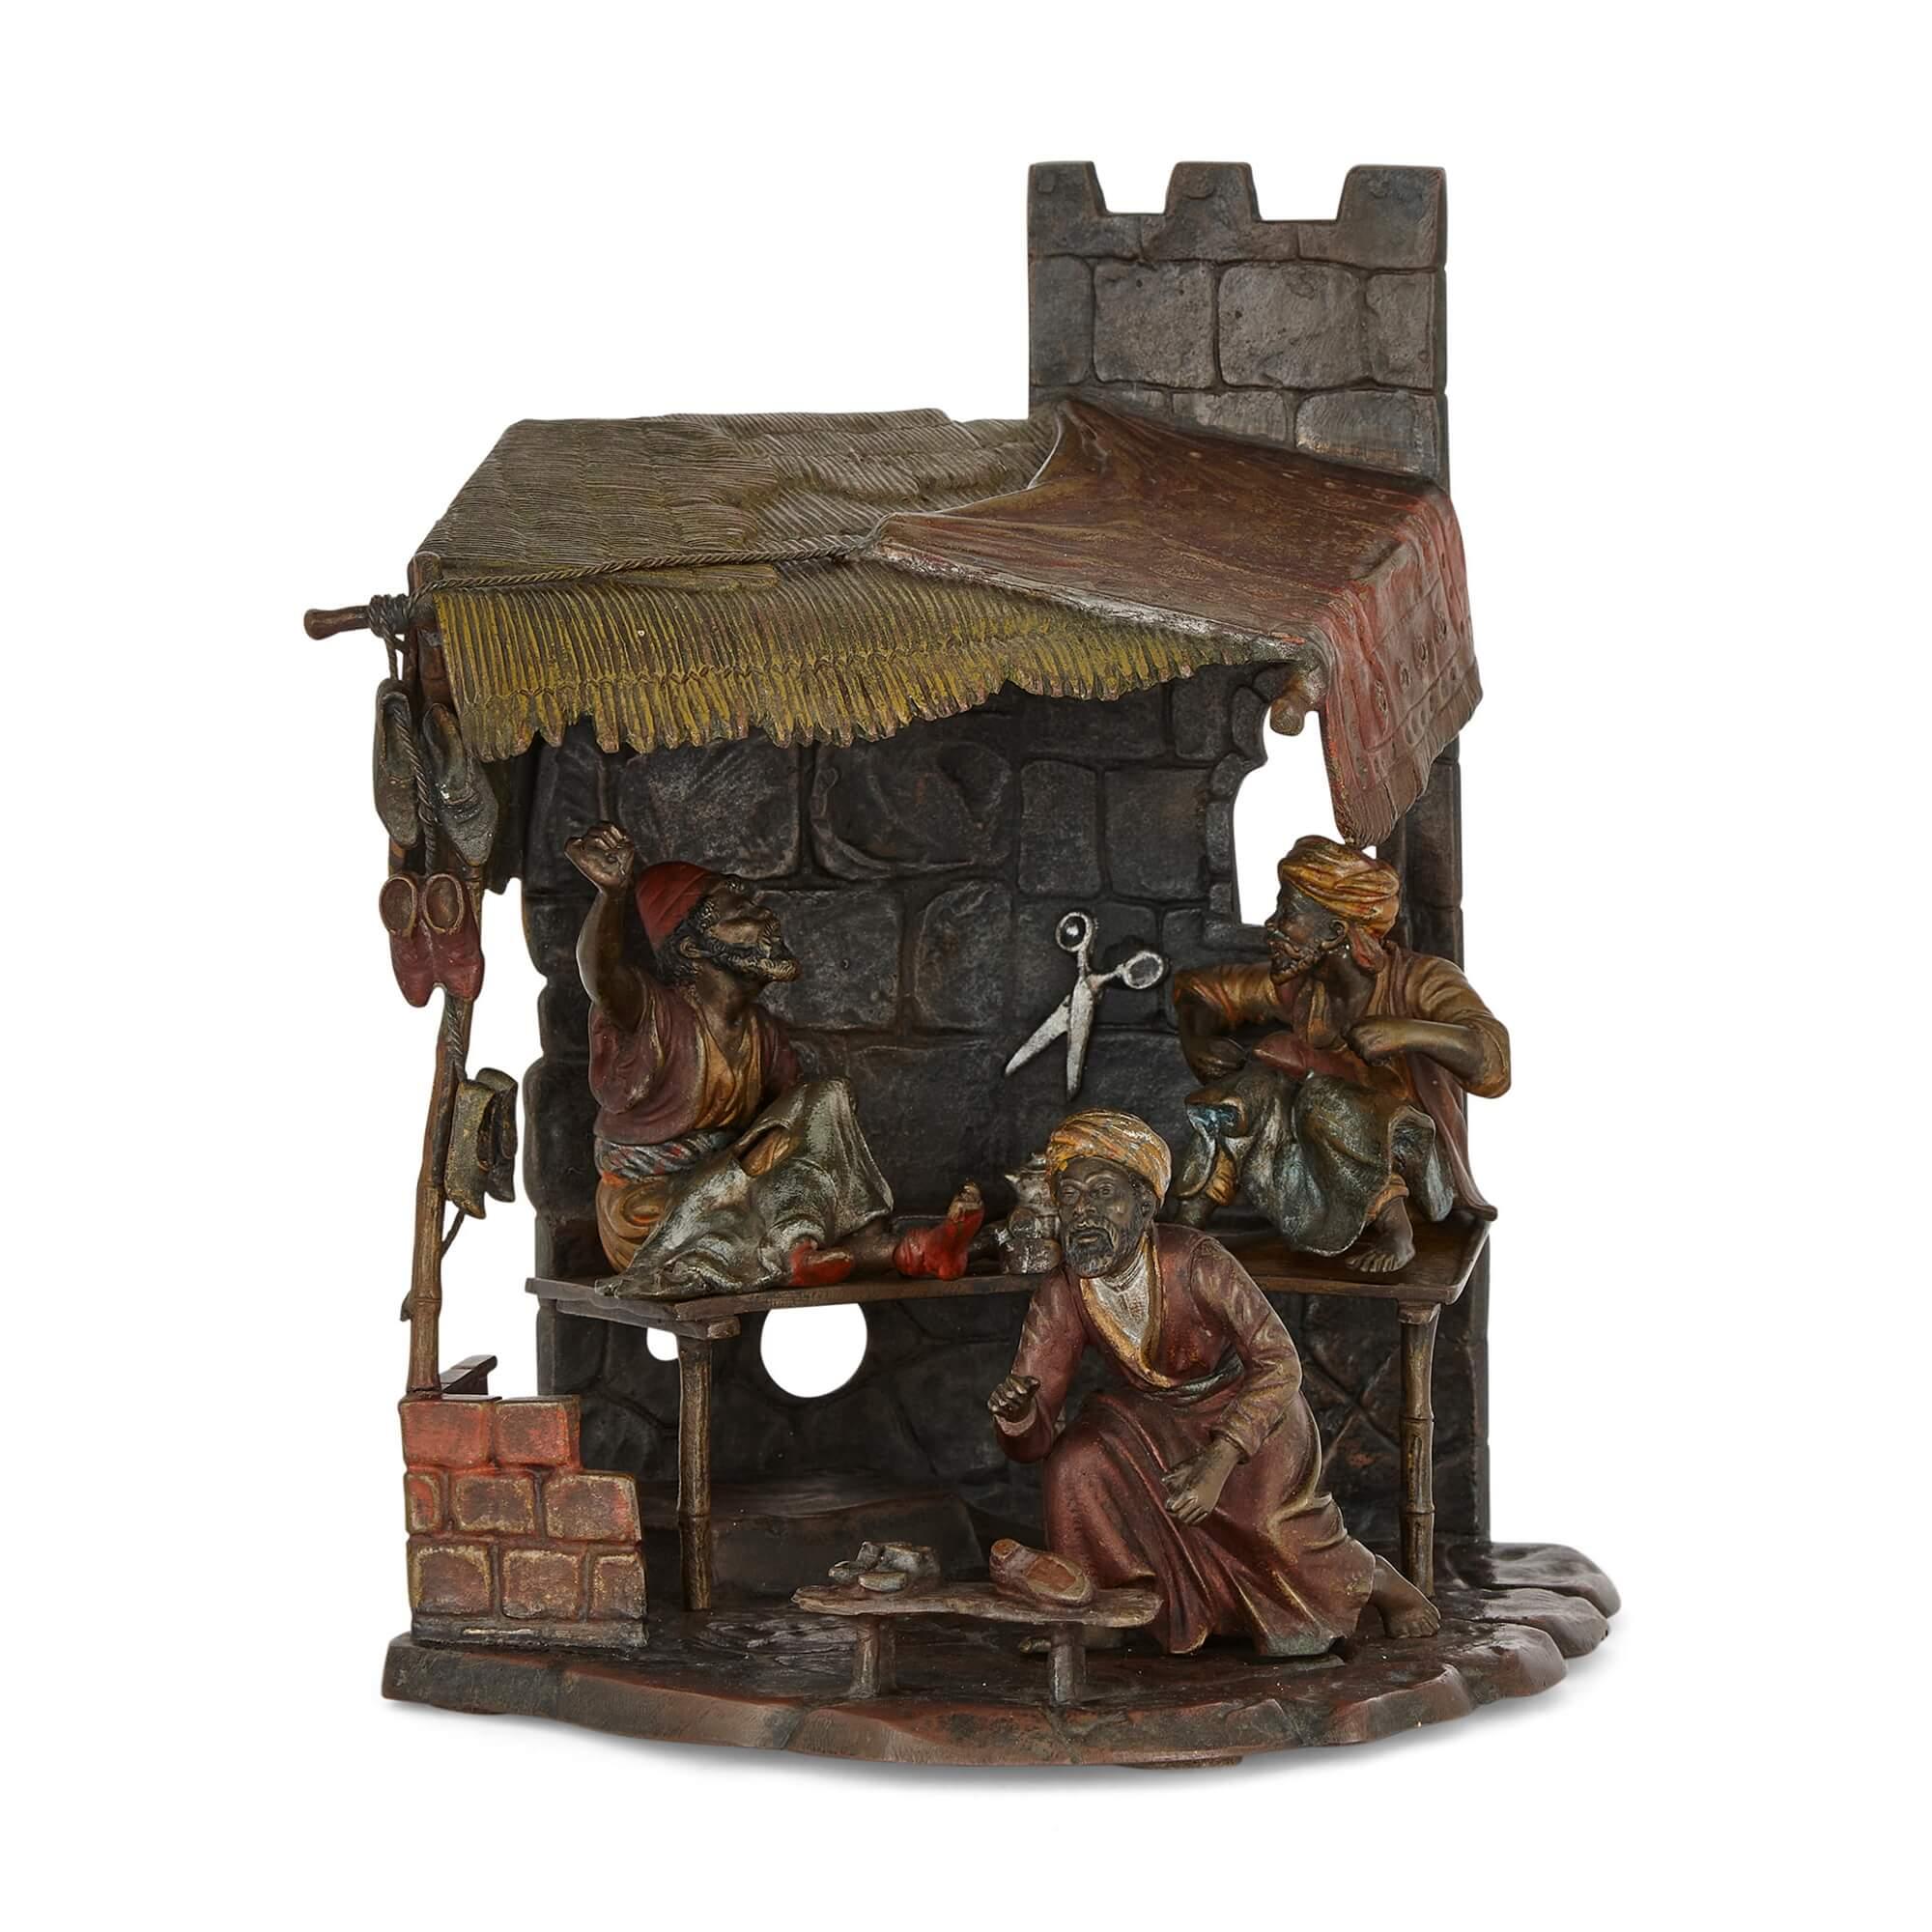 Austrian Orientalist cold-painted bronze lamp of a shoe cobbler 
Austrian, Early 20th Century 
Height 23cm, width 21cm, depth 16cm

The story presented by the makers of this sculptural lamp is set at a shoe cobbler’s workshop. Made in the